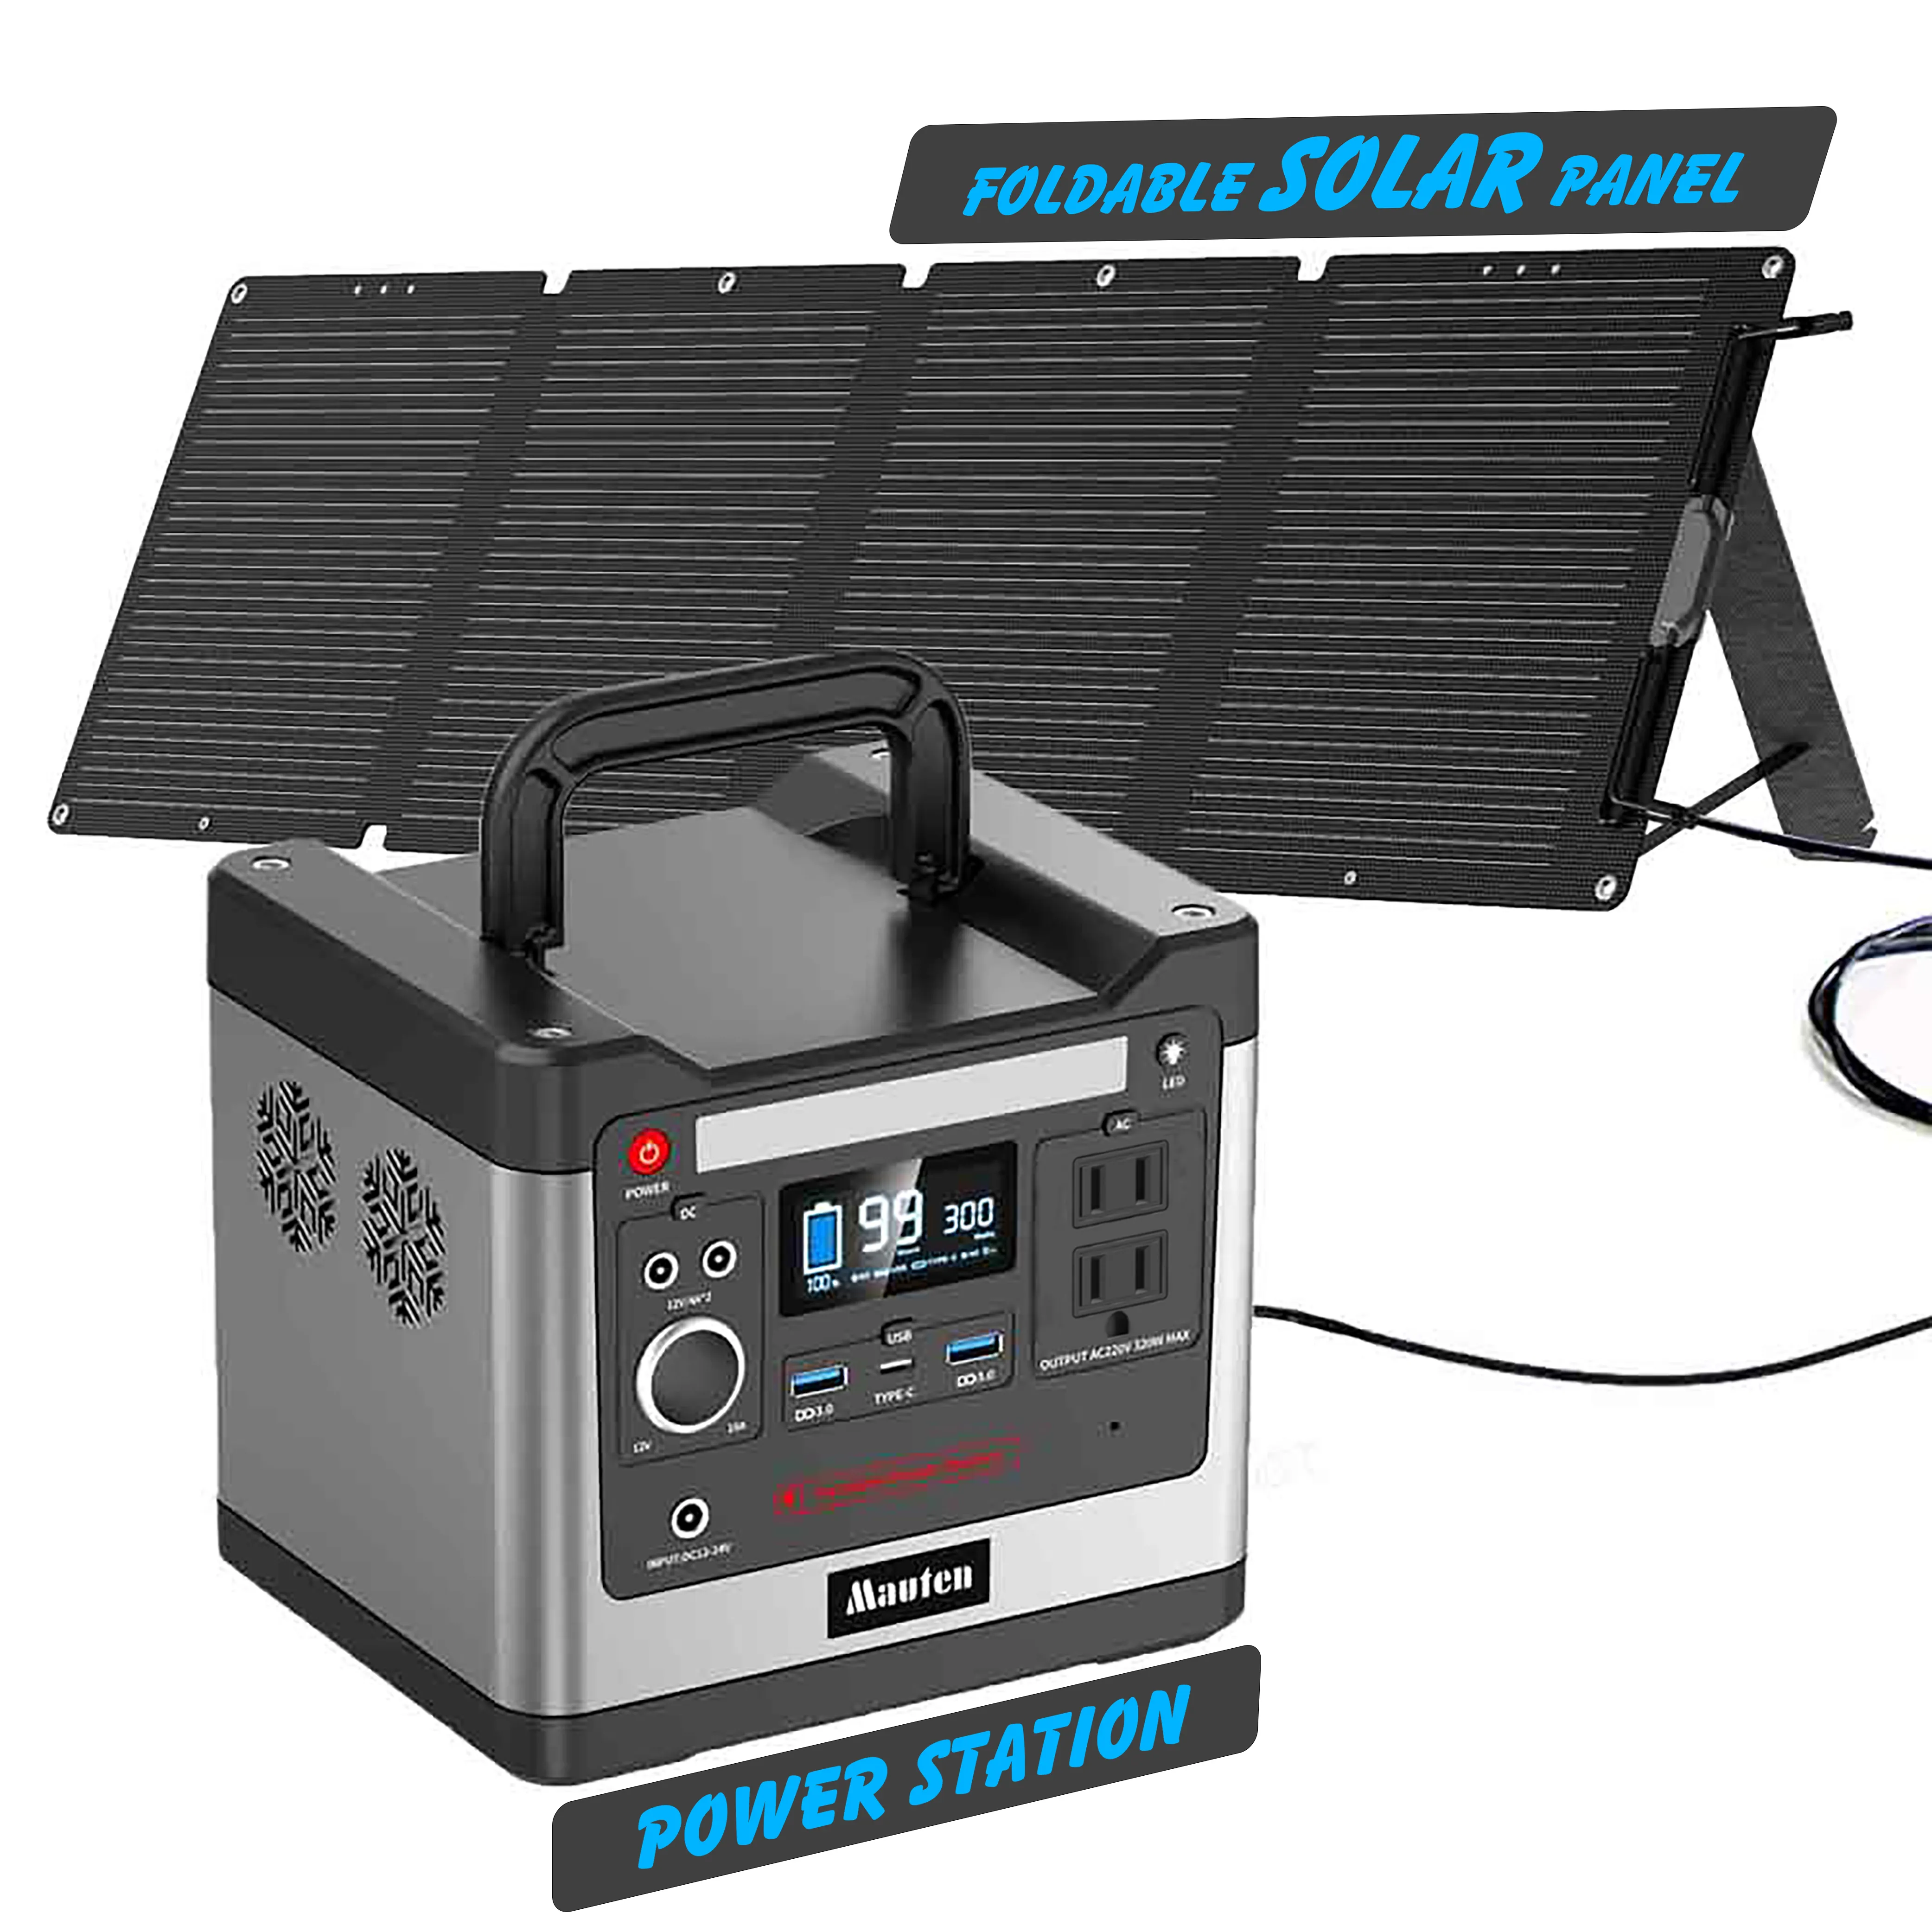 300W 500W 700W OEM ODM LOGO Home SolarPower Generator 220v Outdoor Portable Power Station For outdoor Camp Travel